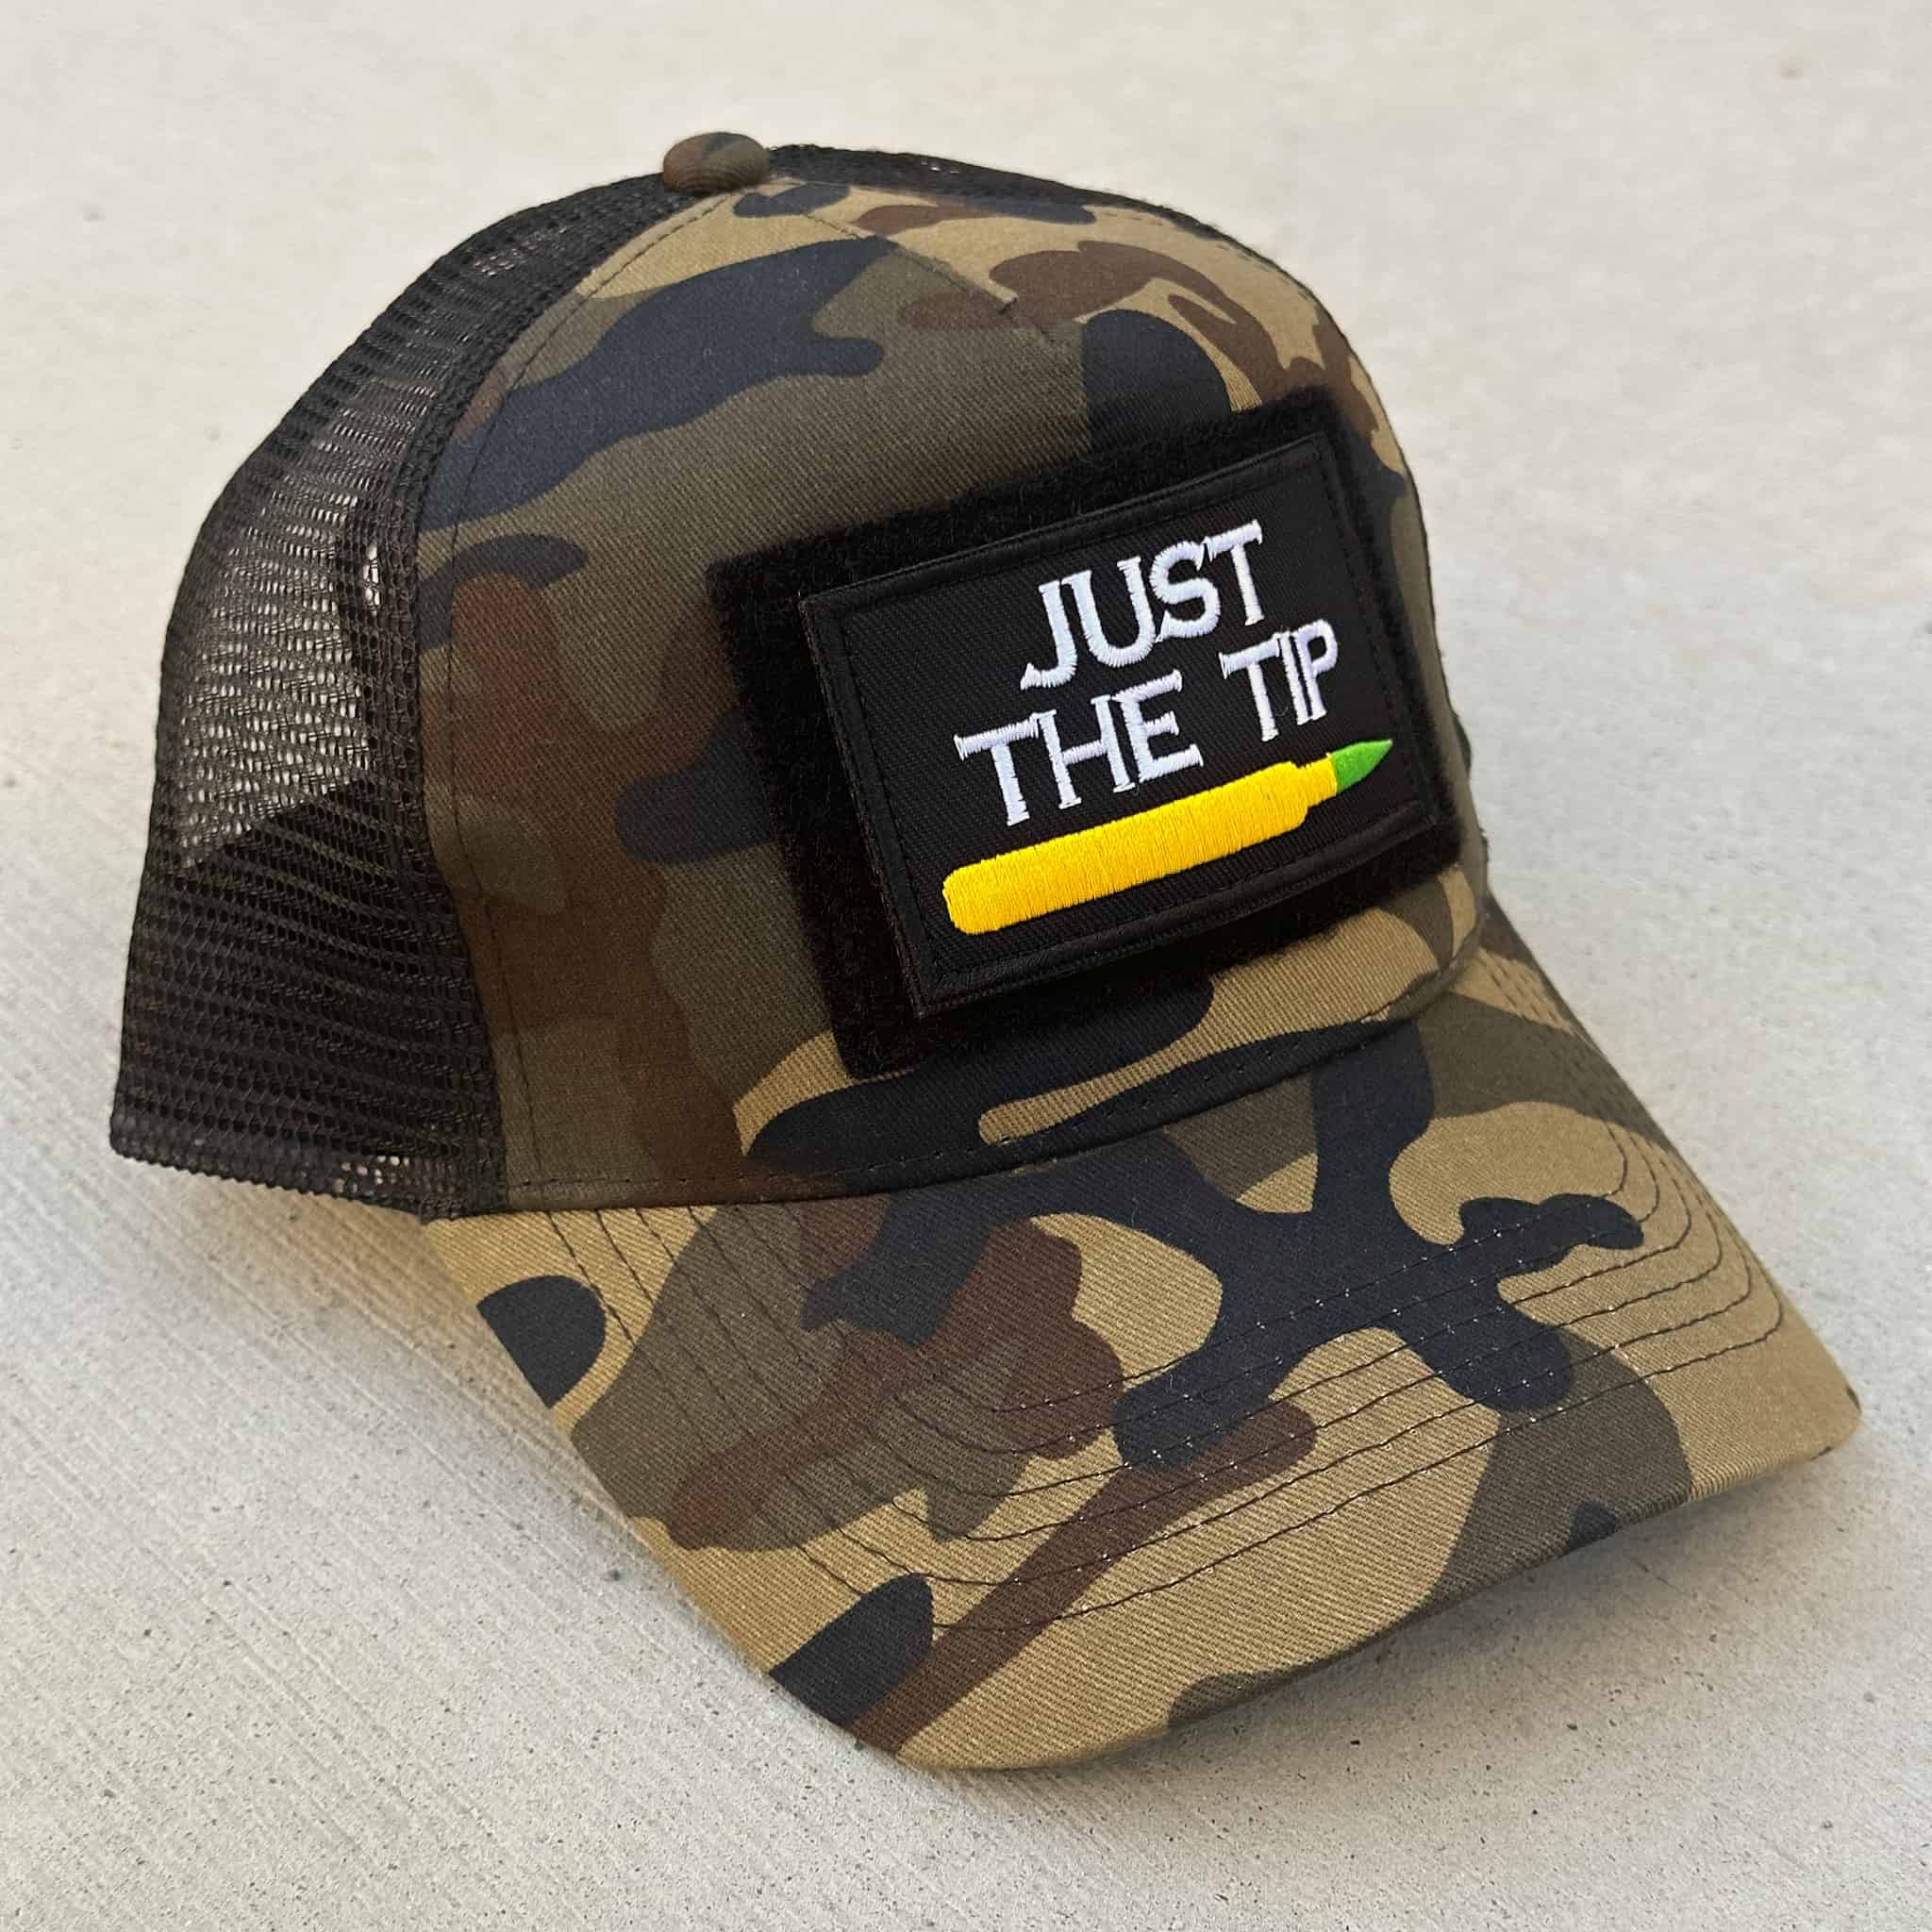 The Blank Canvas Snapback cap in camo color with the 'Just the Tip' patch attached